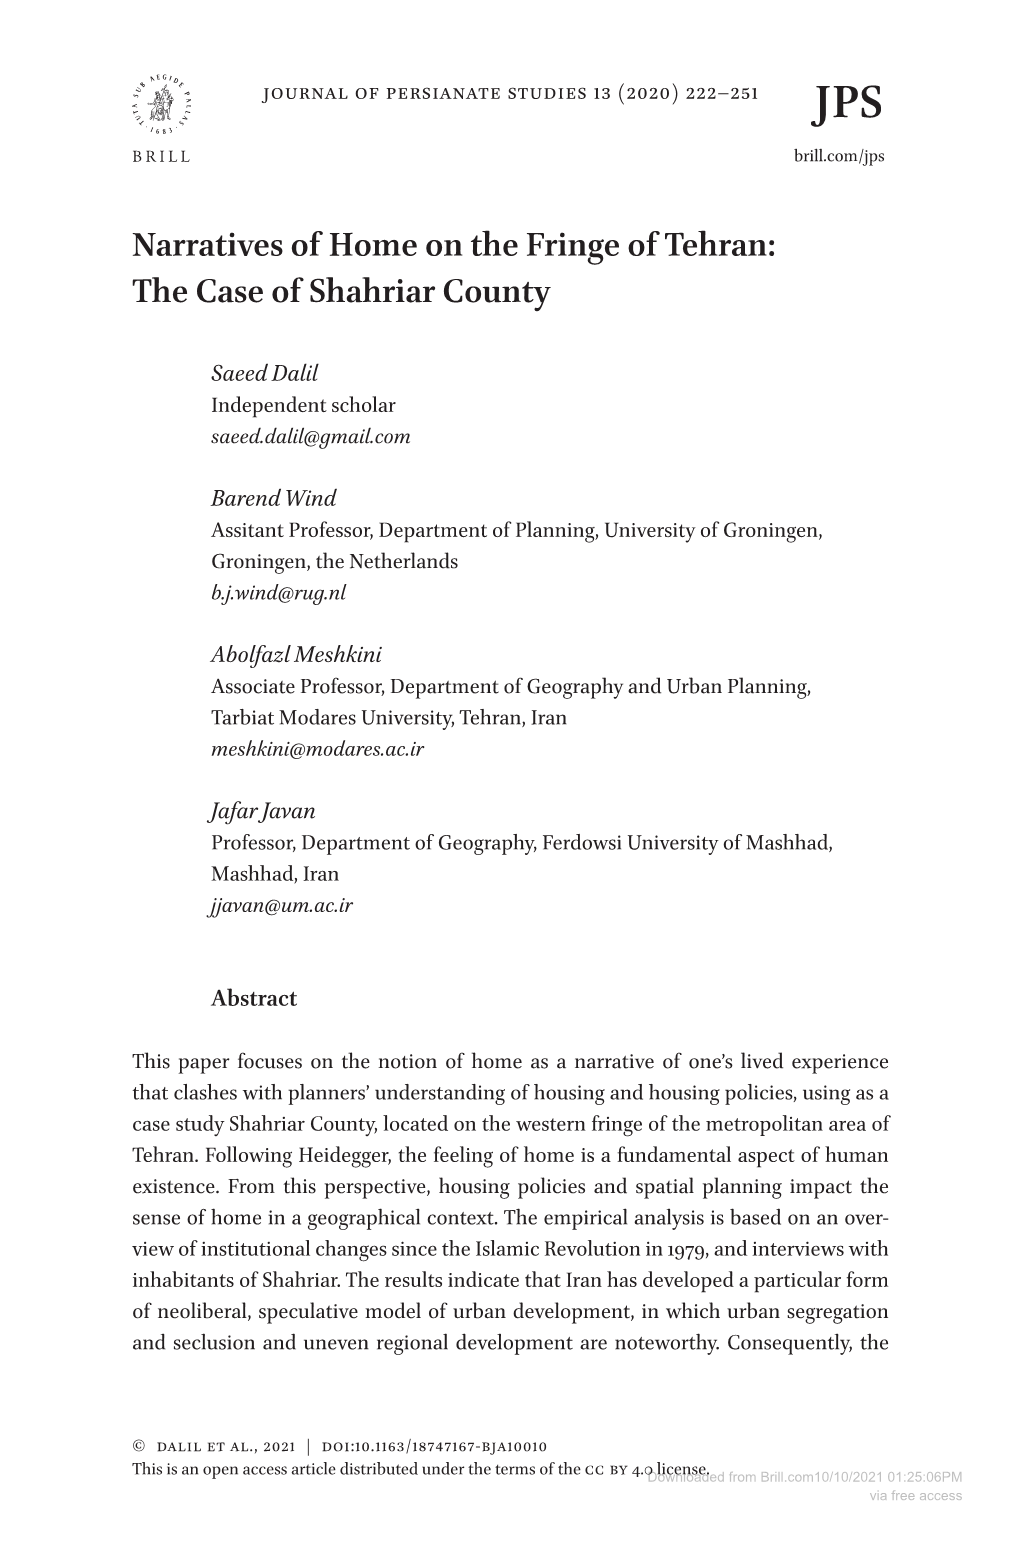 Narratives of Home on the Fringe of Tehran: the Case of Shahriar County